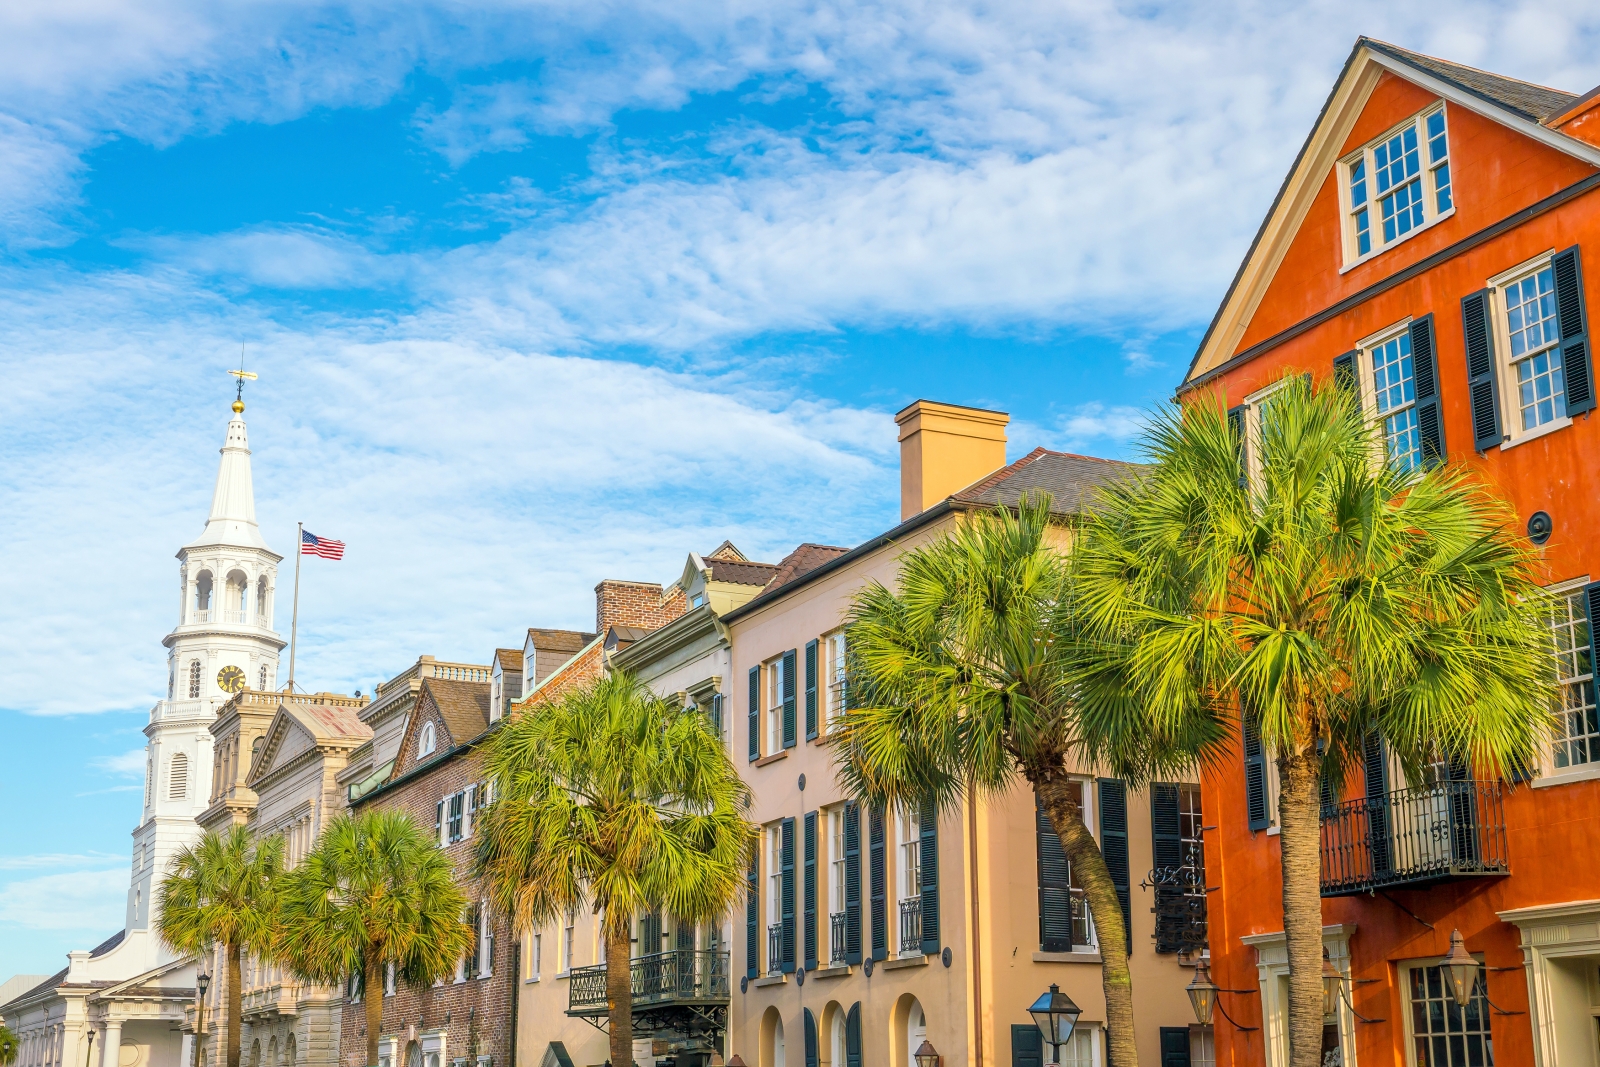 Houses and palm trees in downtown Charleston, USA